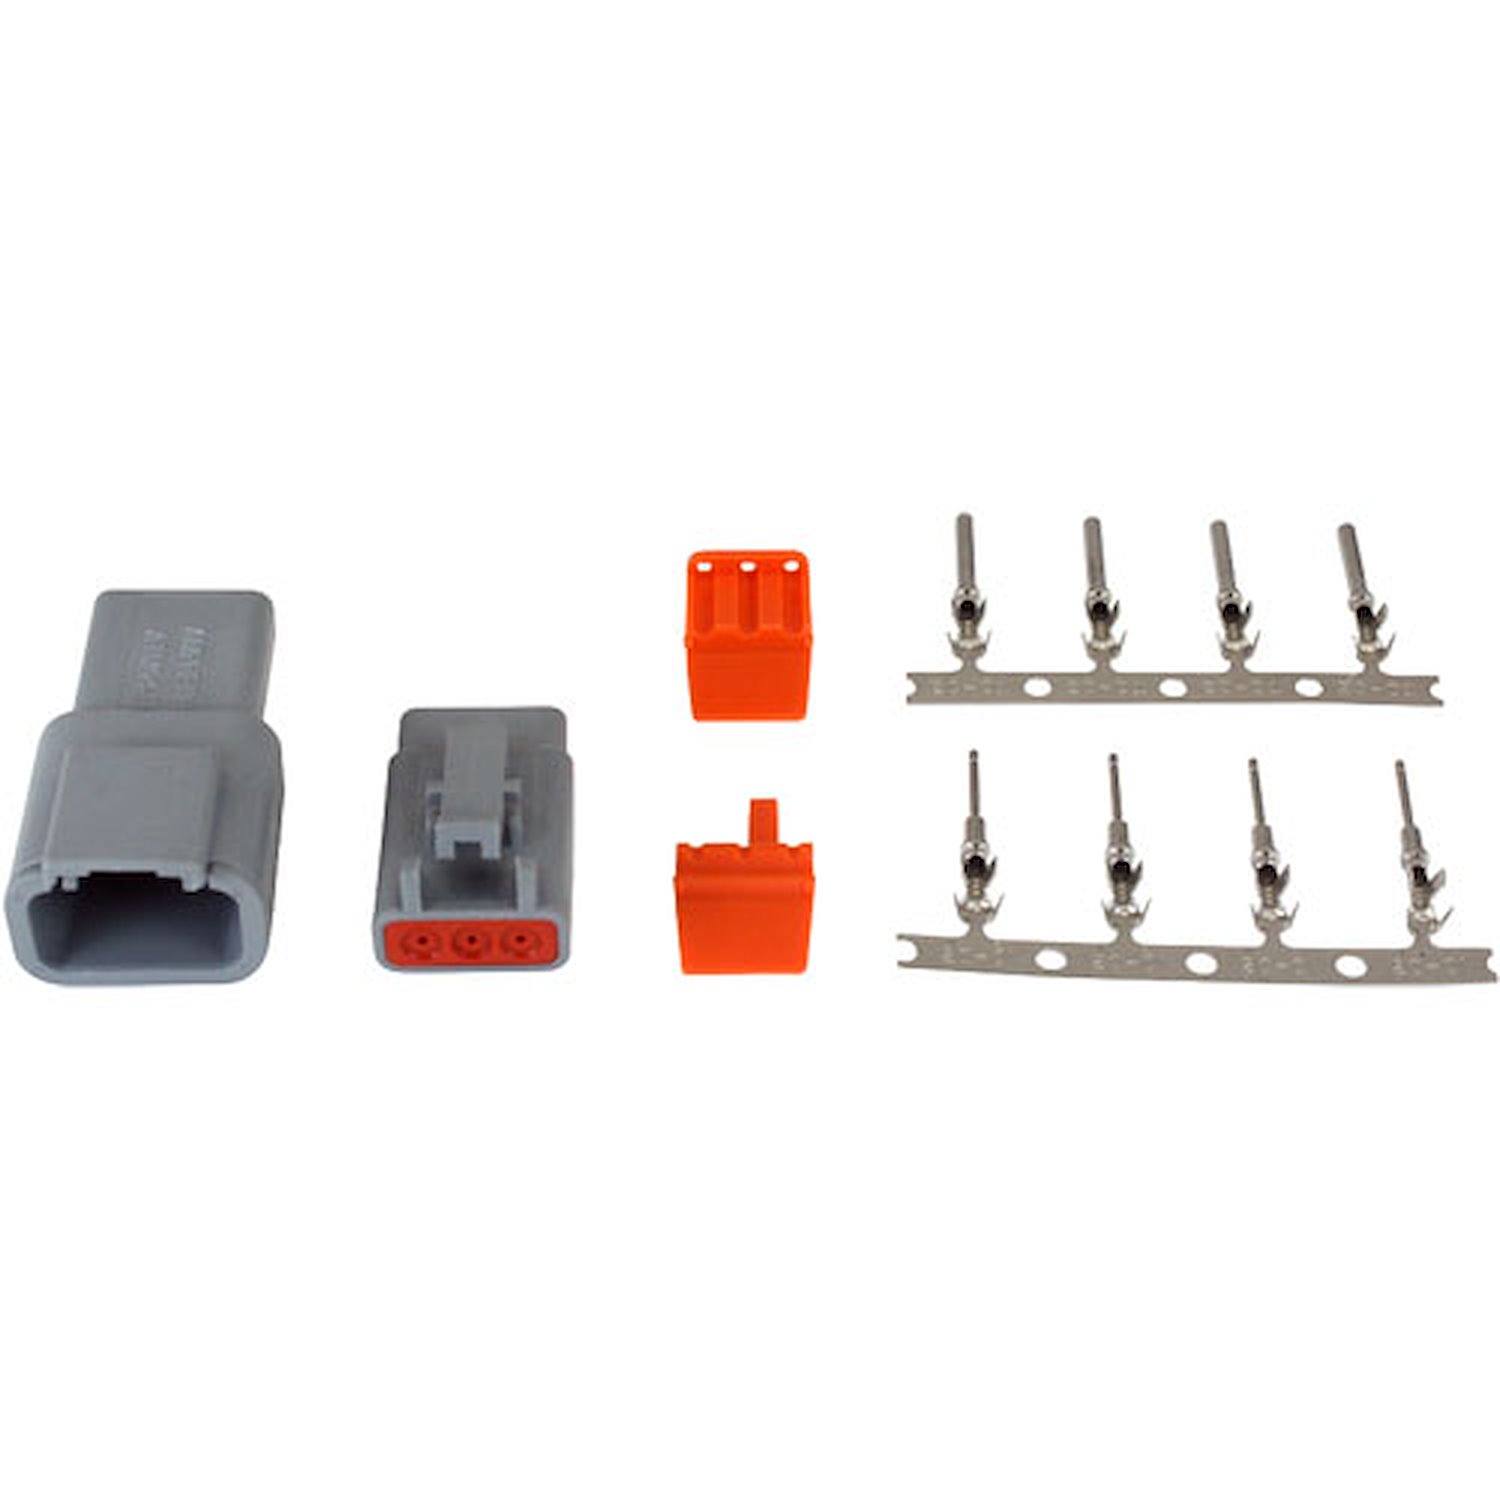 DTM-Style 3-Way Connector Kit Includes Plug, Receptacle, Plug Wedge Lock, Receptacle Wedge Lock, 4 Female Pins And 4 Male Pins